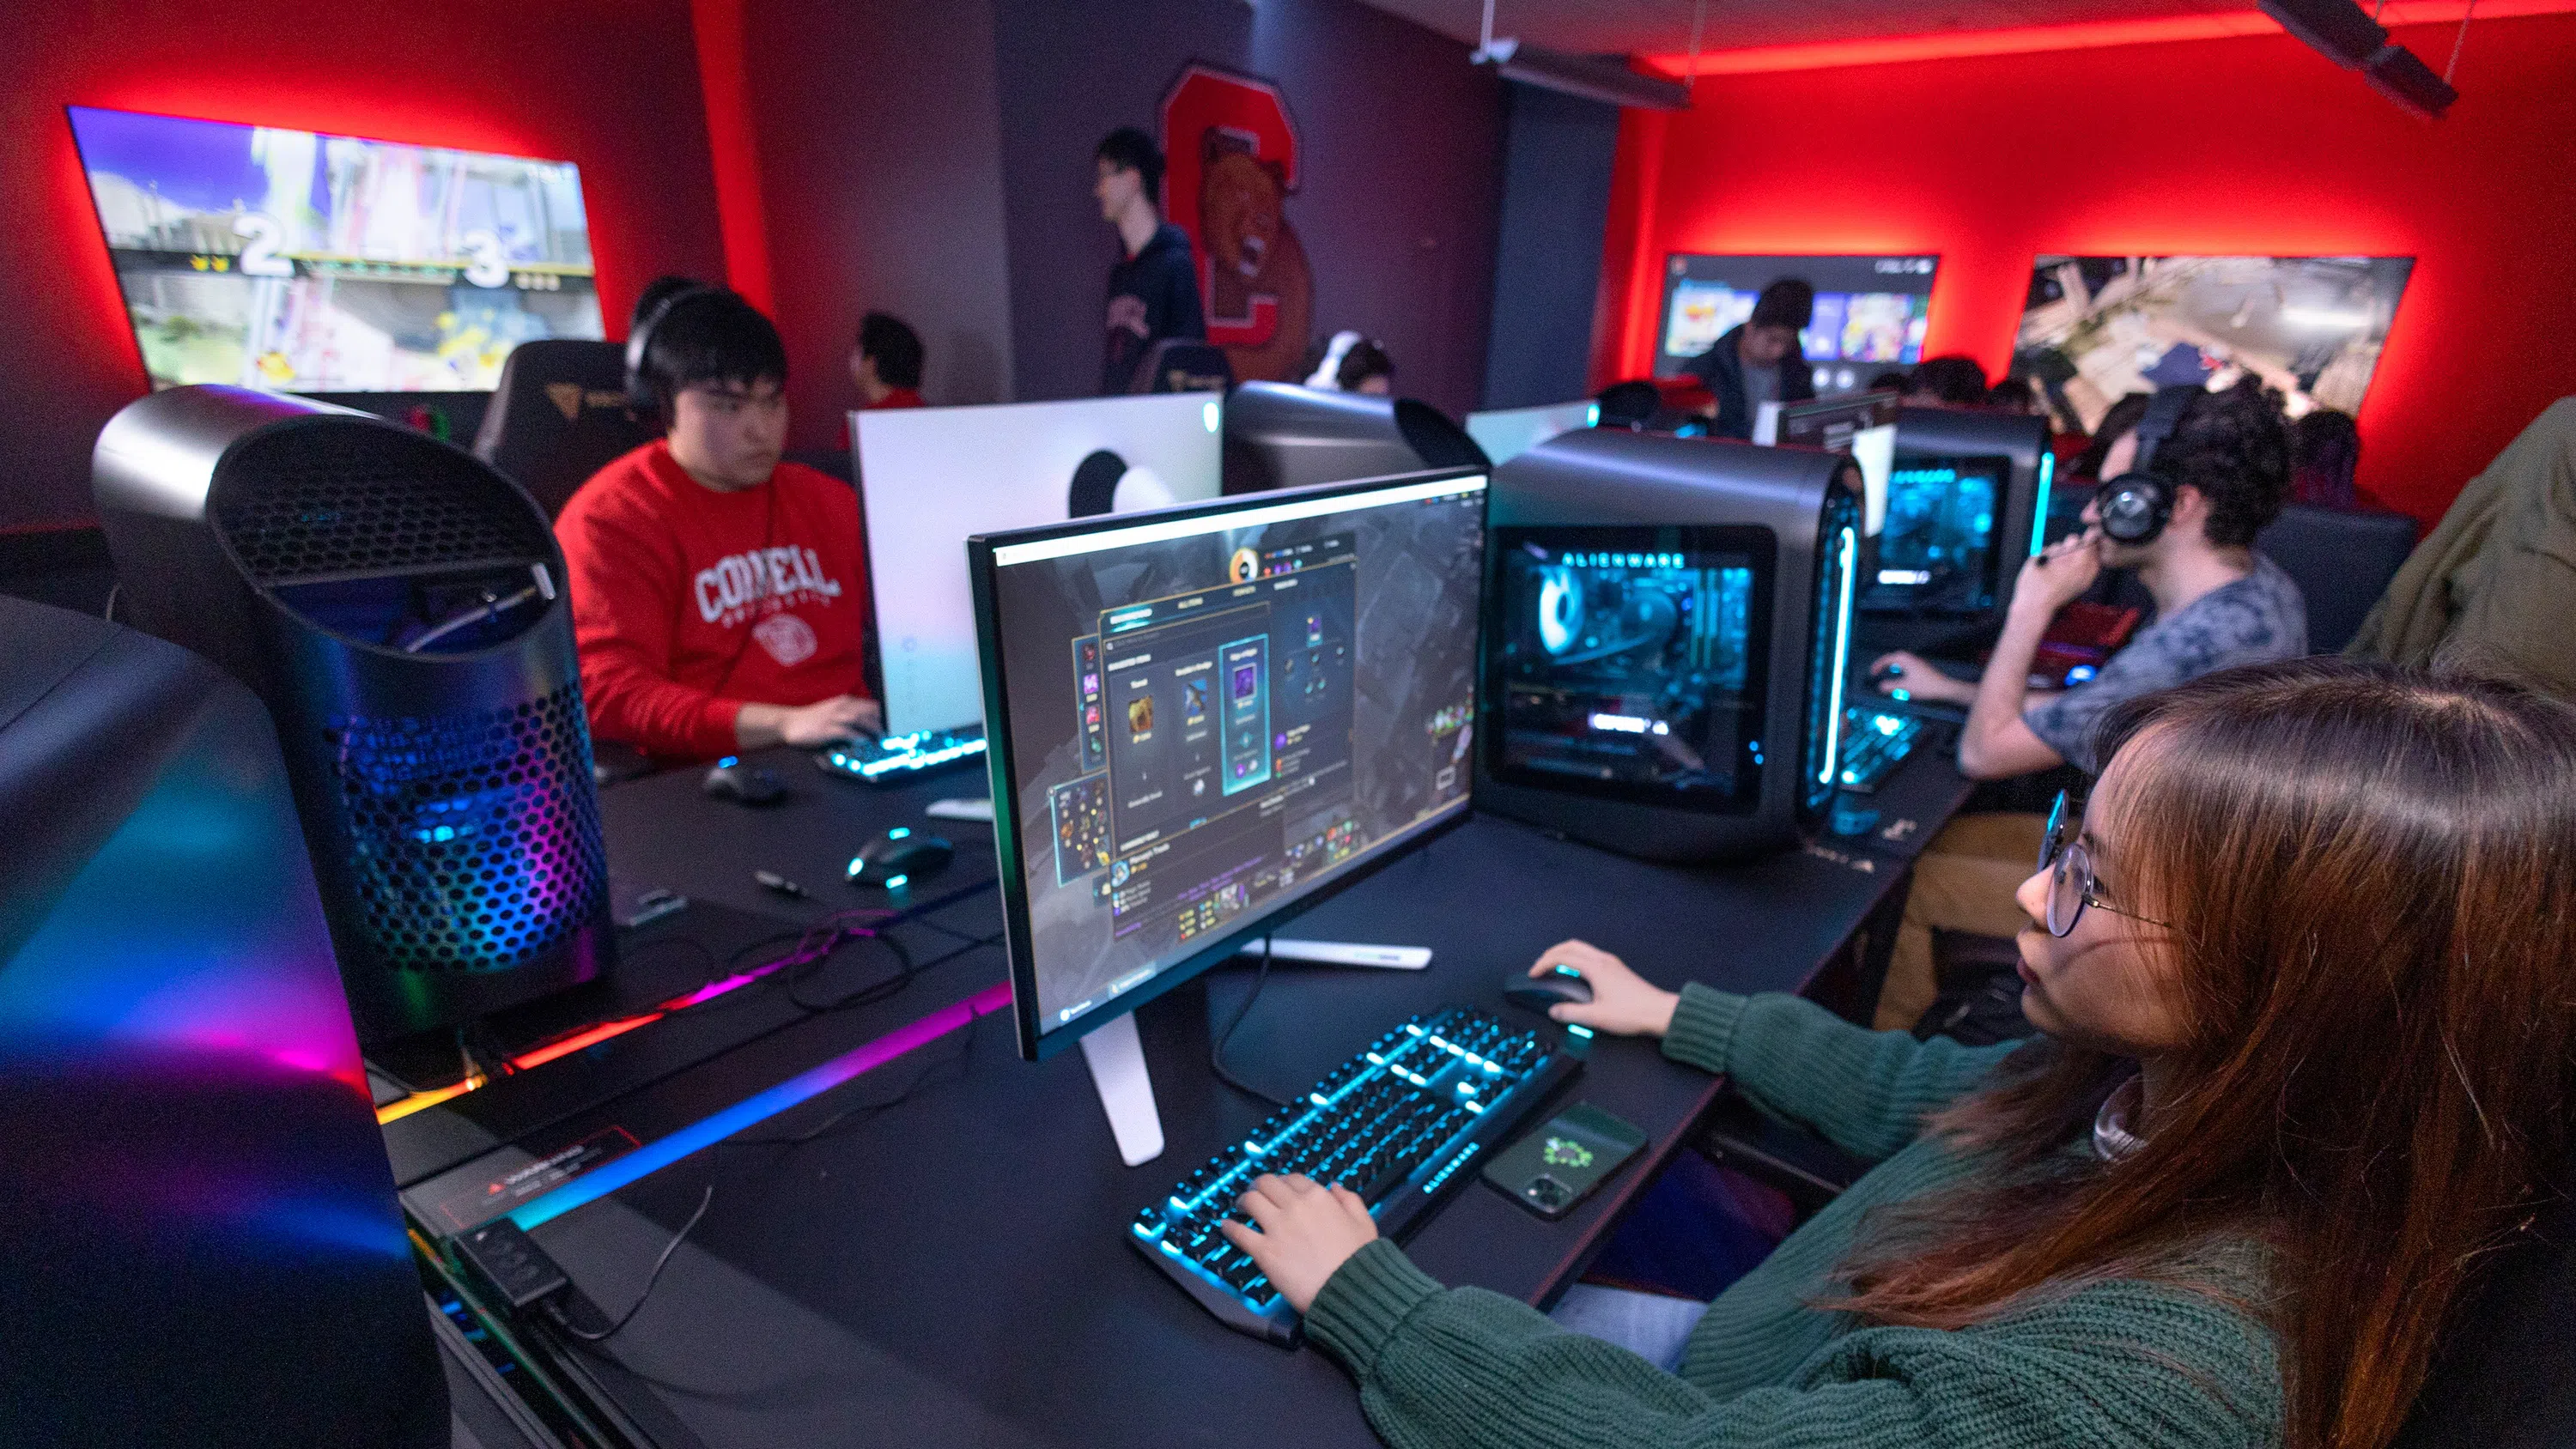 In the Esports Gaming Lounge, four students sit and stand near a console on the left, while a sole gamer uses a different console in the foreground, at right.